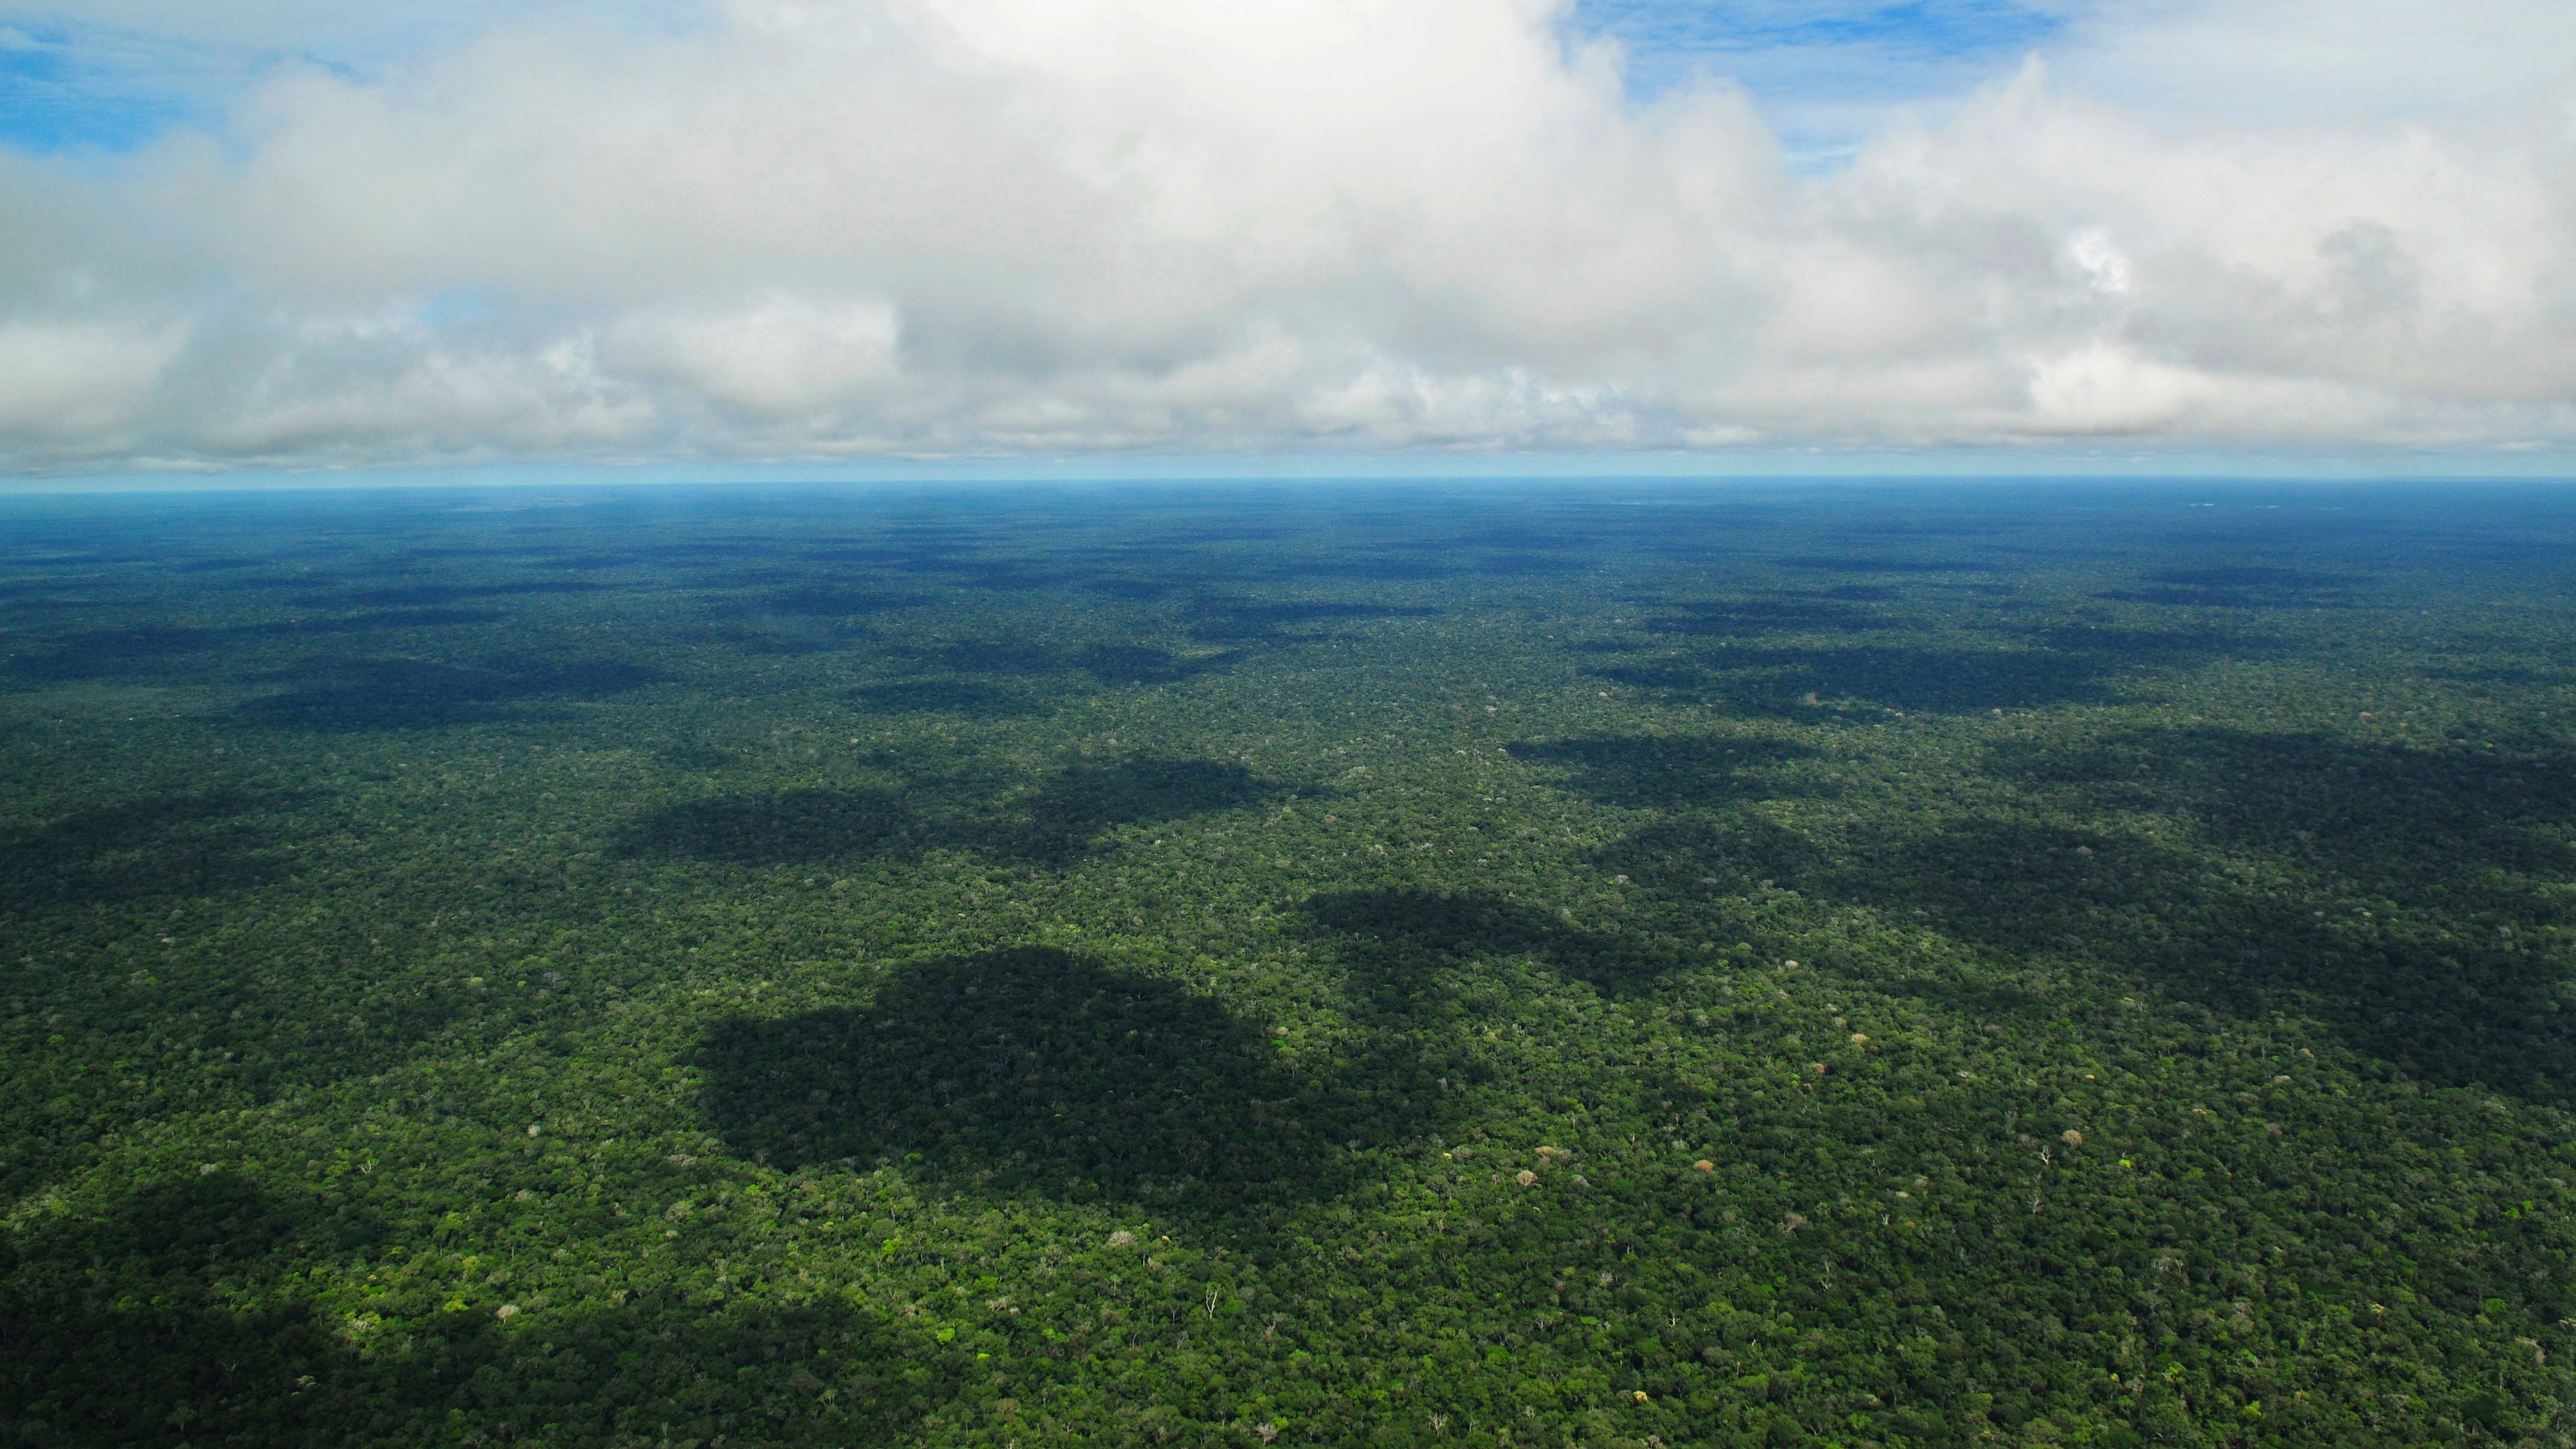 The rainforest covers 1 700 million hectares, an area the size of South America, and 6% of the Earth's surface.